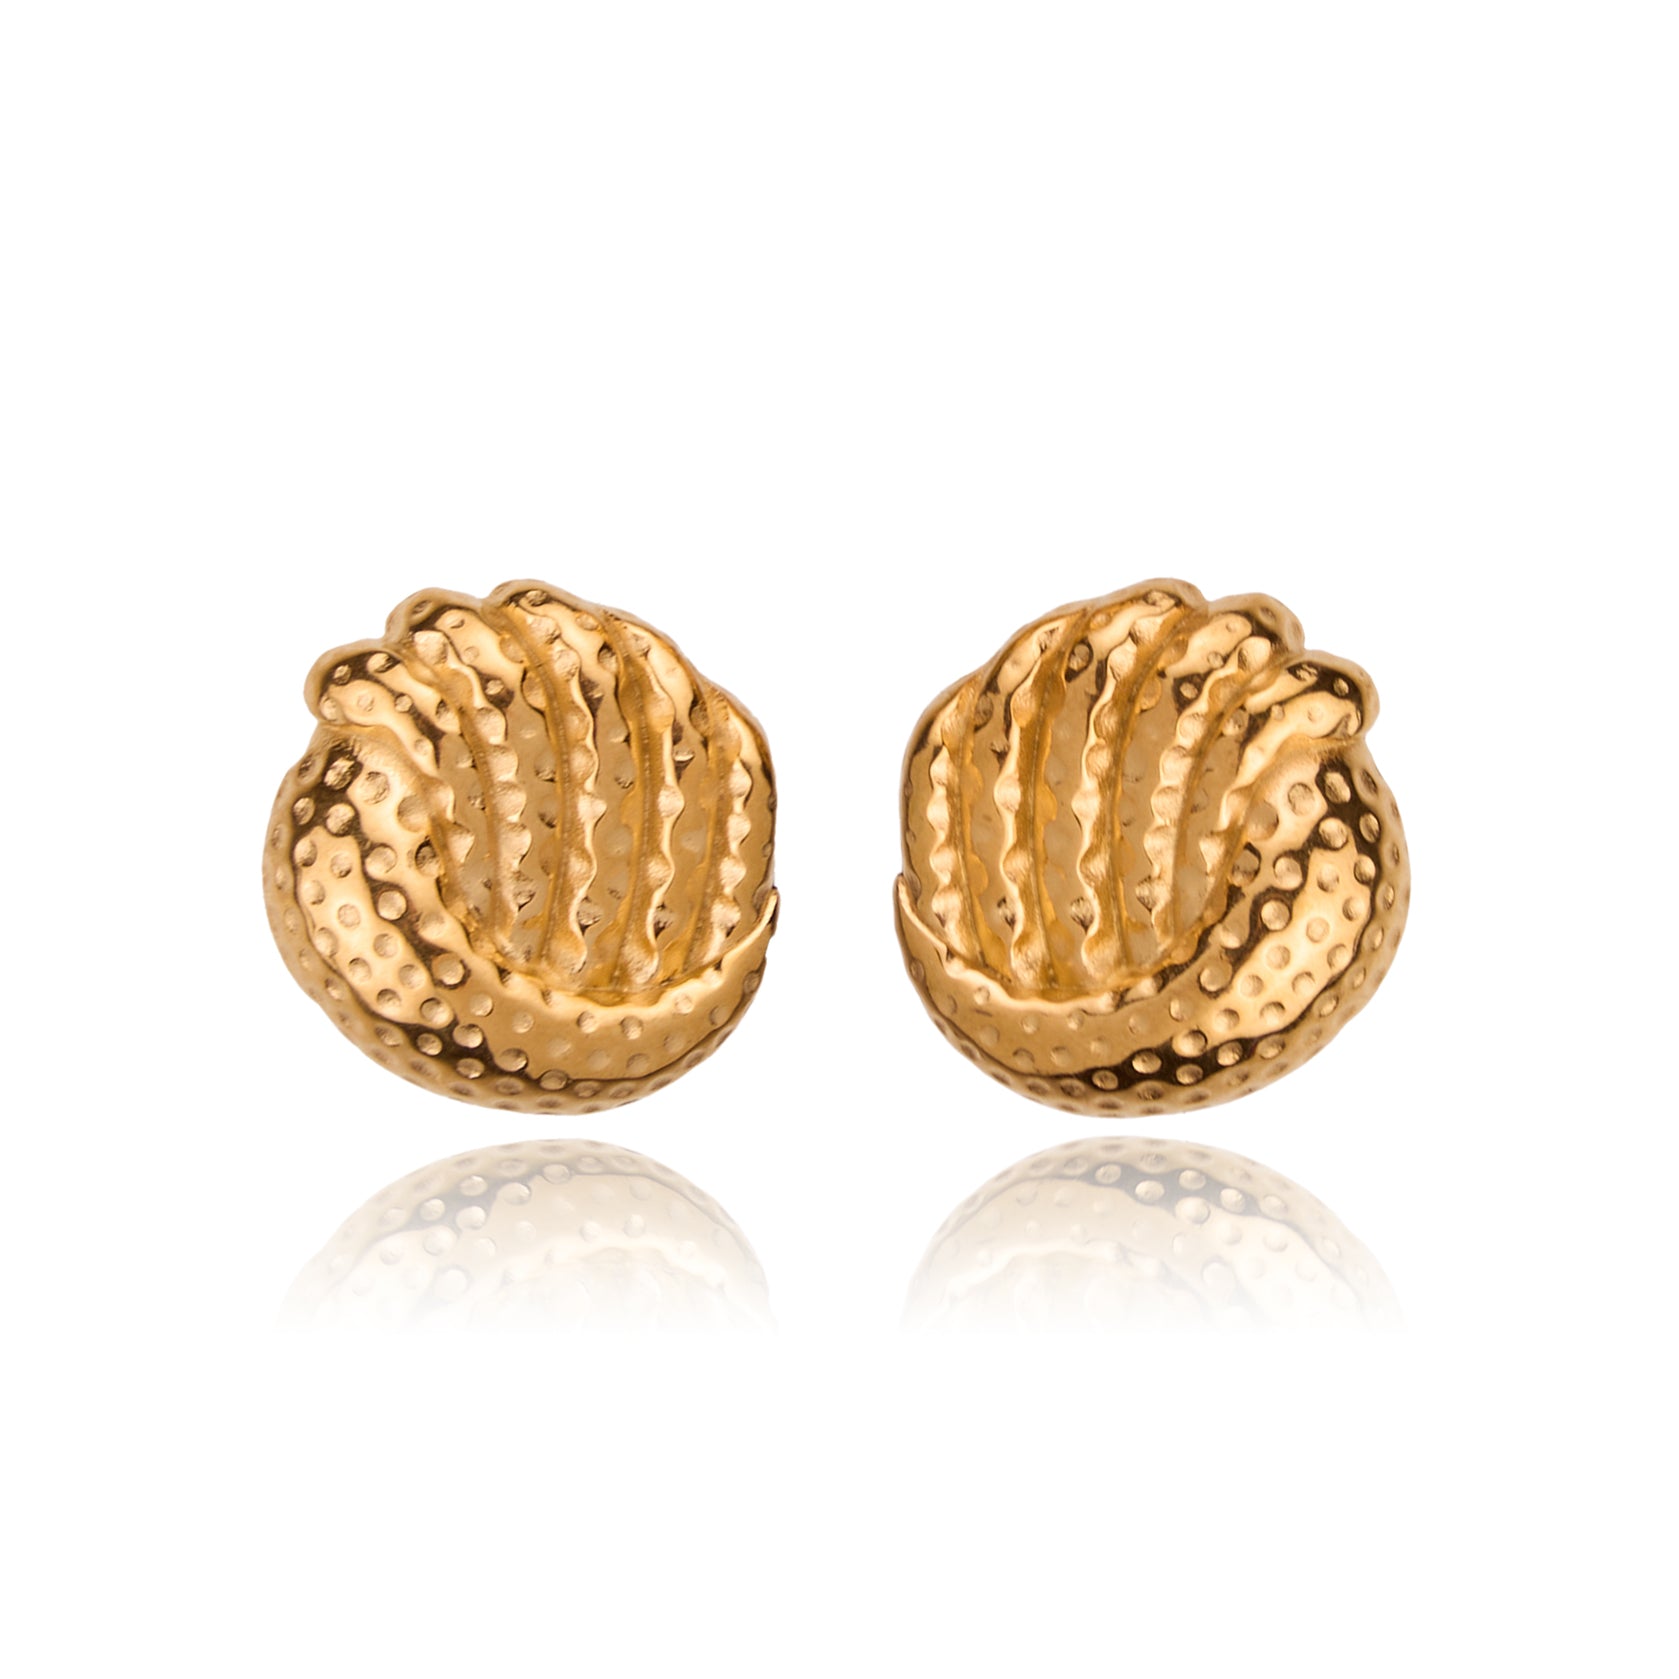 Make a bold fashion statement with our Zuri Earrings. Featuring edgy spike designs and gold finishes, these earrings are perfect for adding a fun and edgy touch to your everyday style, these earrings are a playful addition to any jewelry collection.  18k gold plated on stainless steel. All the earrings come in a beautiful jewelry pouch.